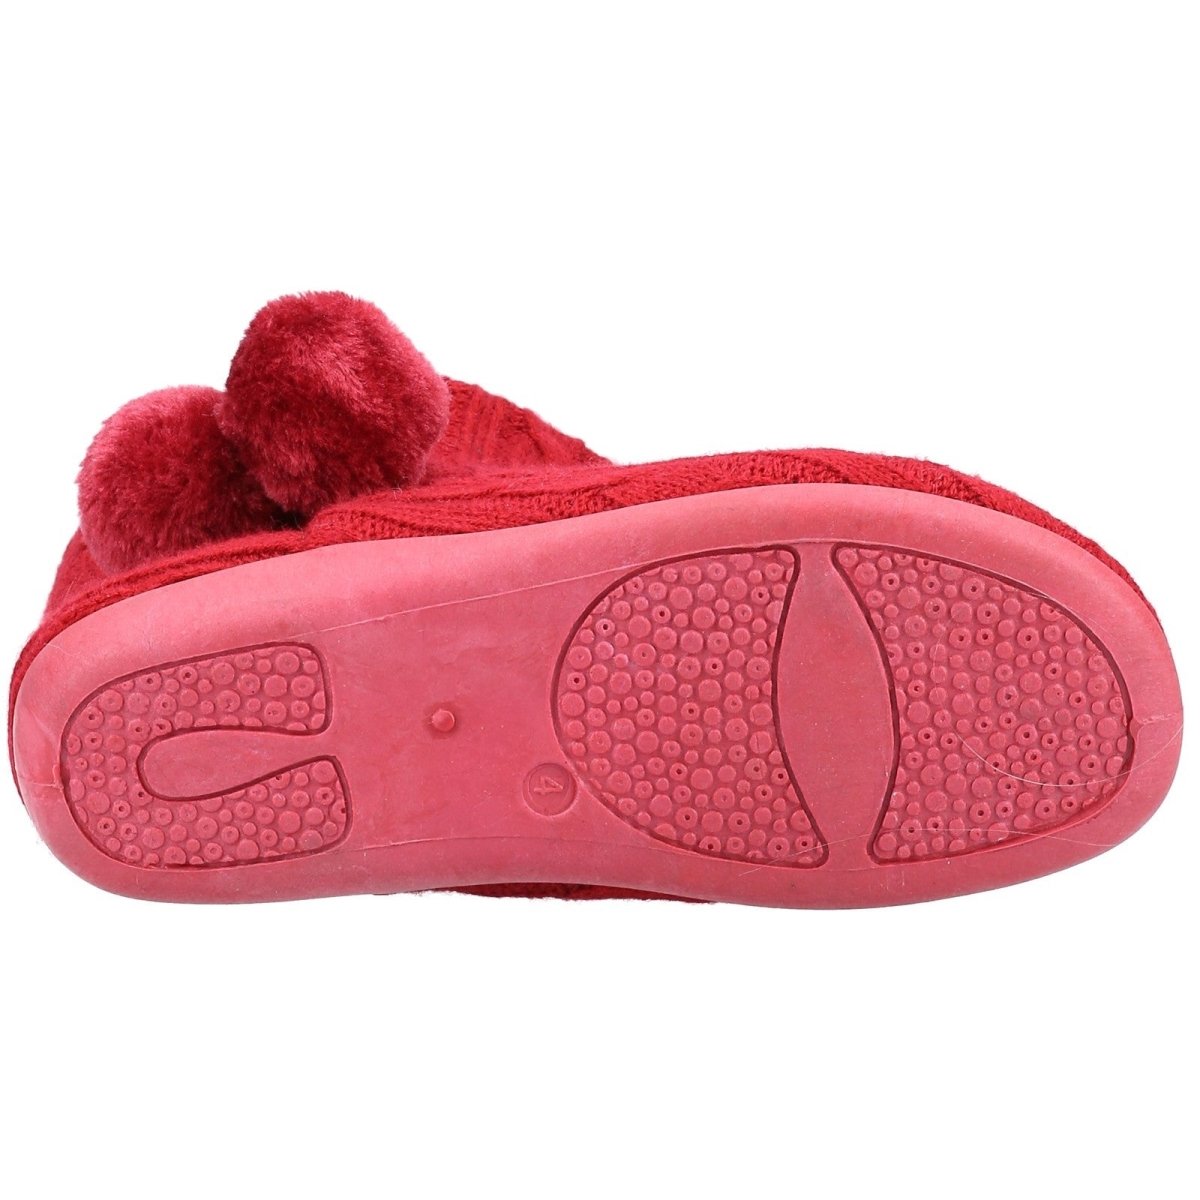 Fleet & Foster Apple Knitted Pom Poms Ladies Bootie Slippers - Shoe Store Direct